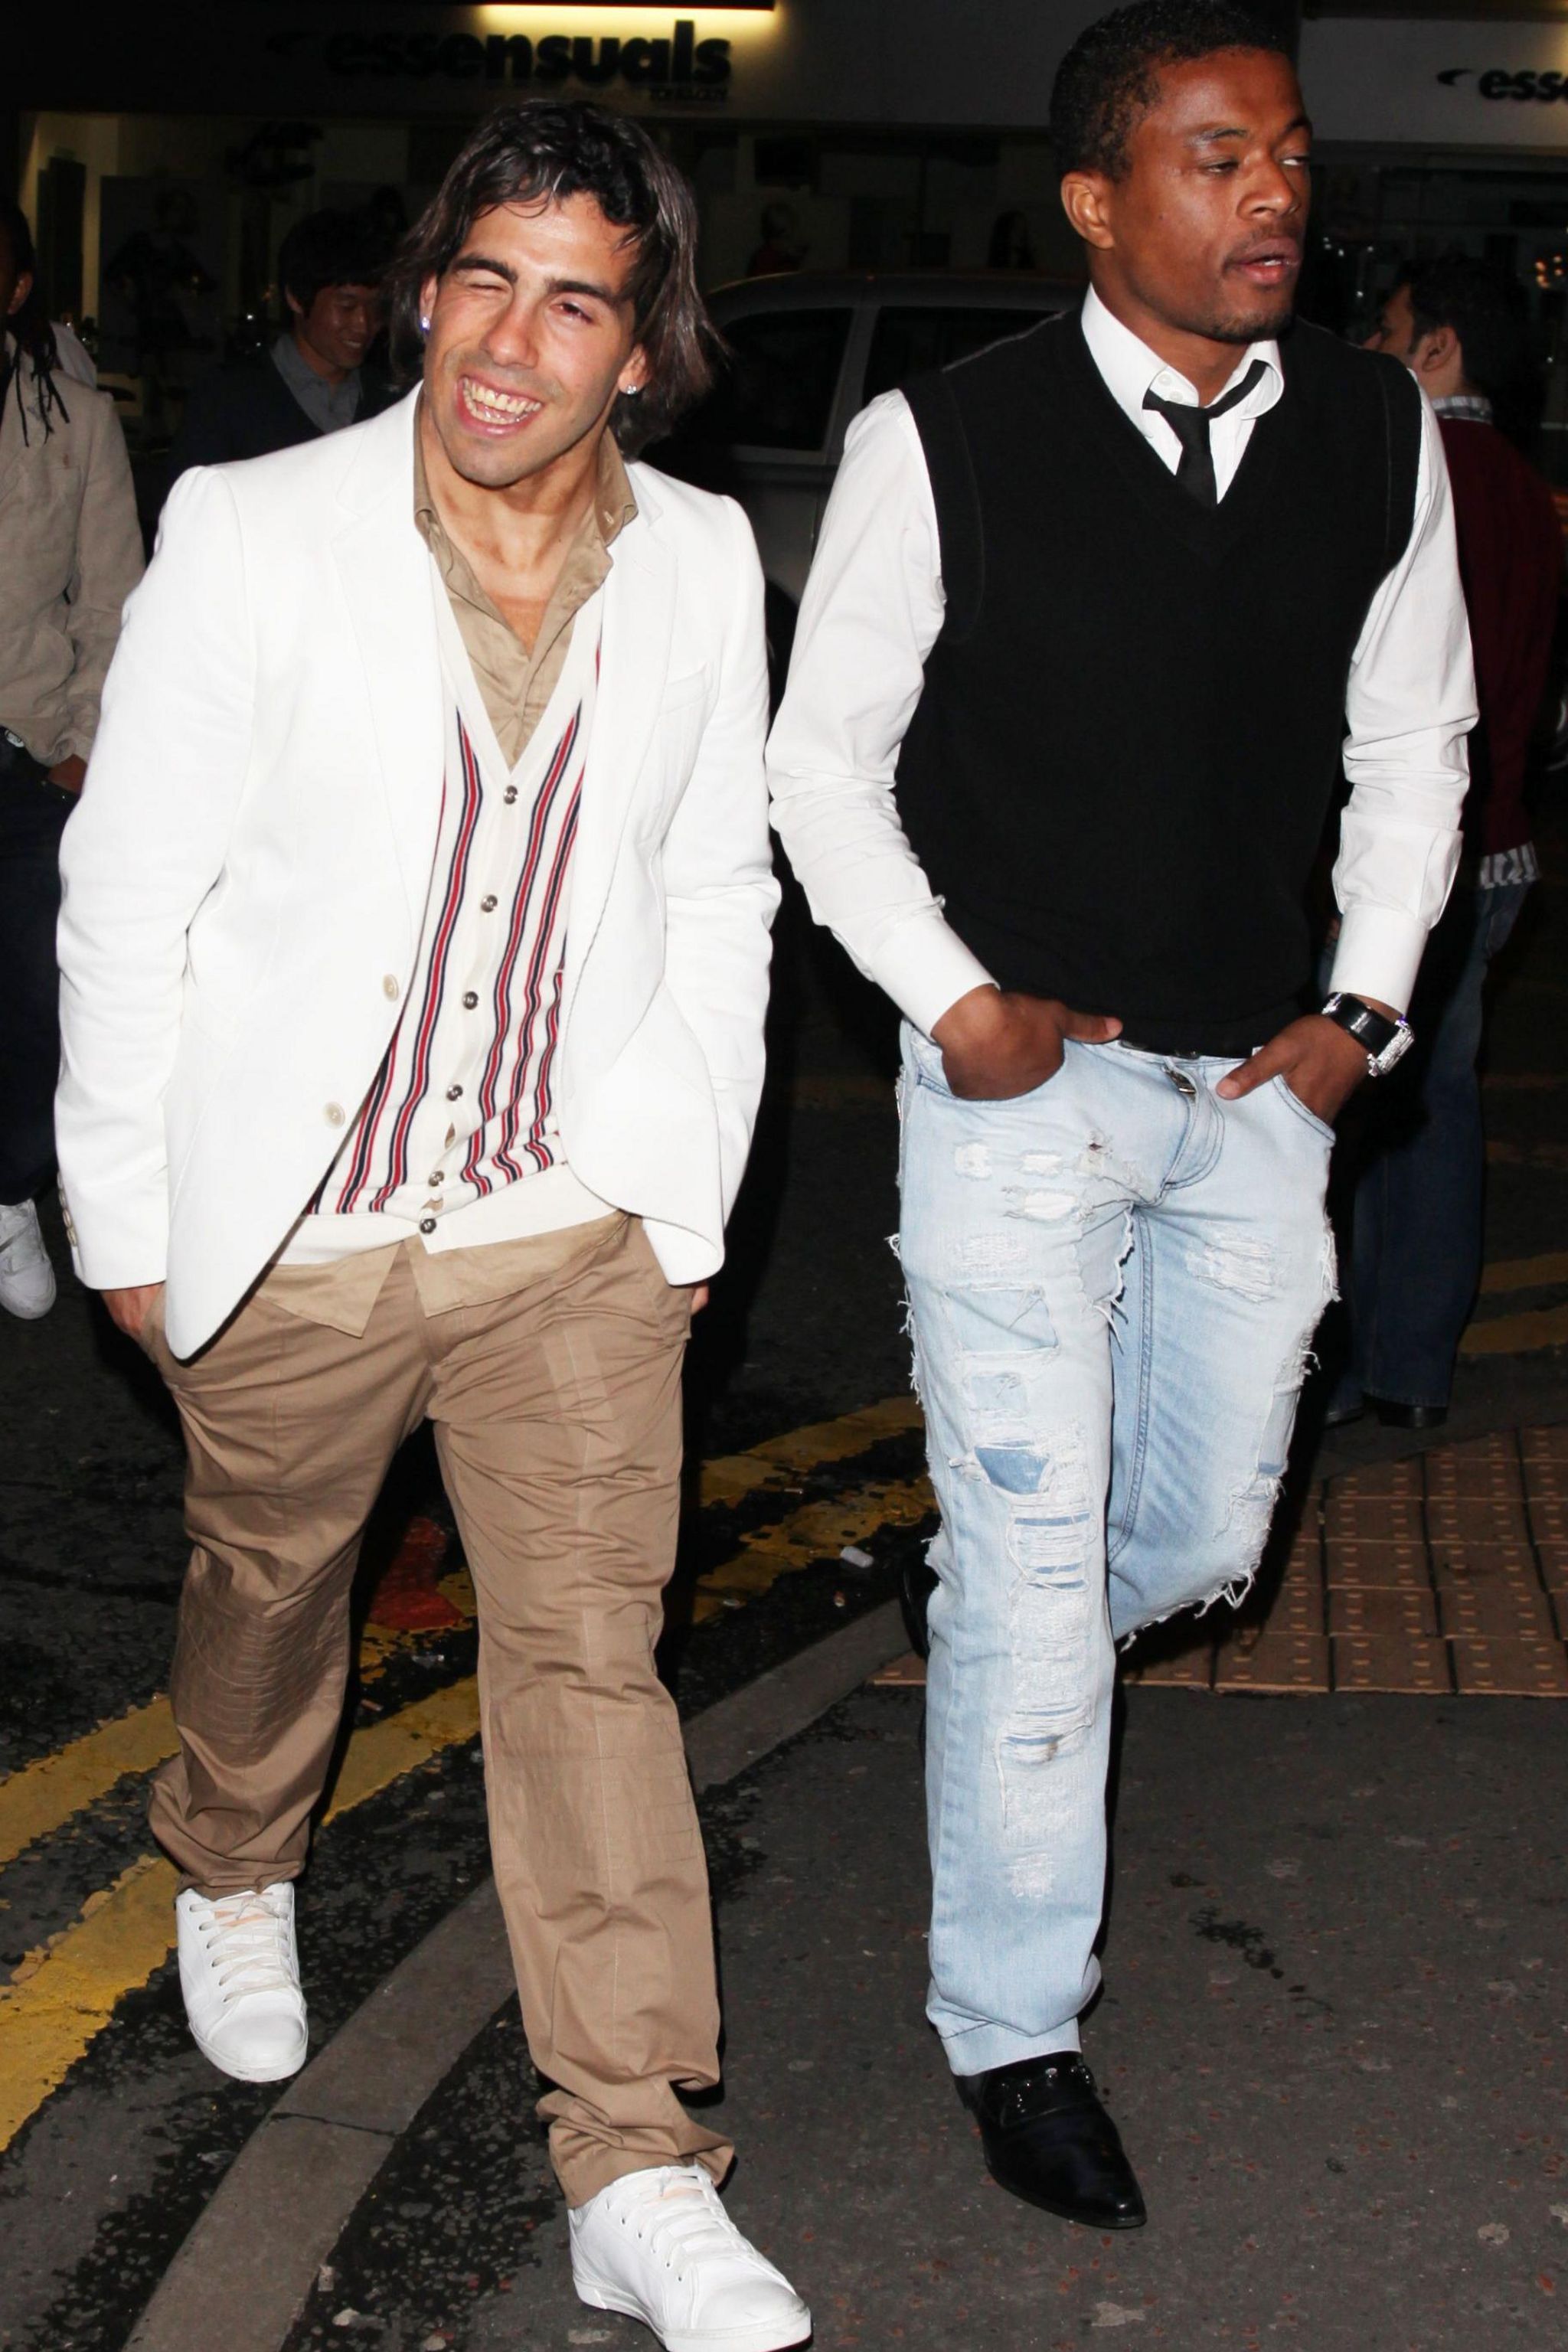 Carlos Tevez and Patrice Evra walk side by side on a night out